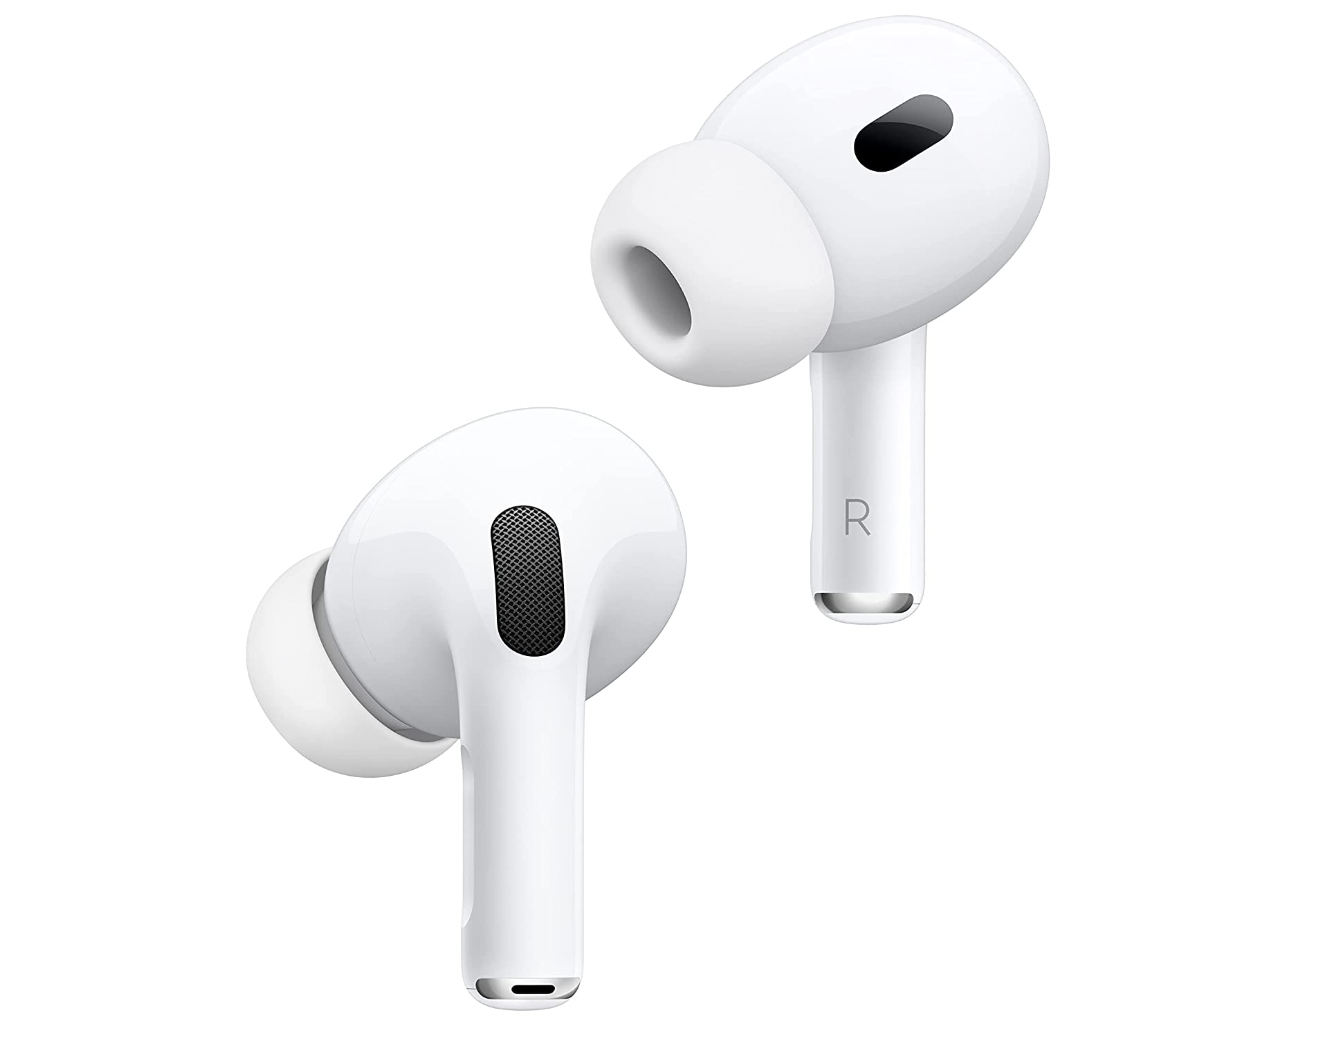 Apple AirPods Pro 2nd Generation Wireless Earbuds